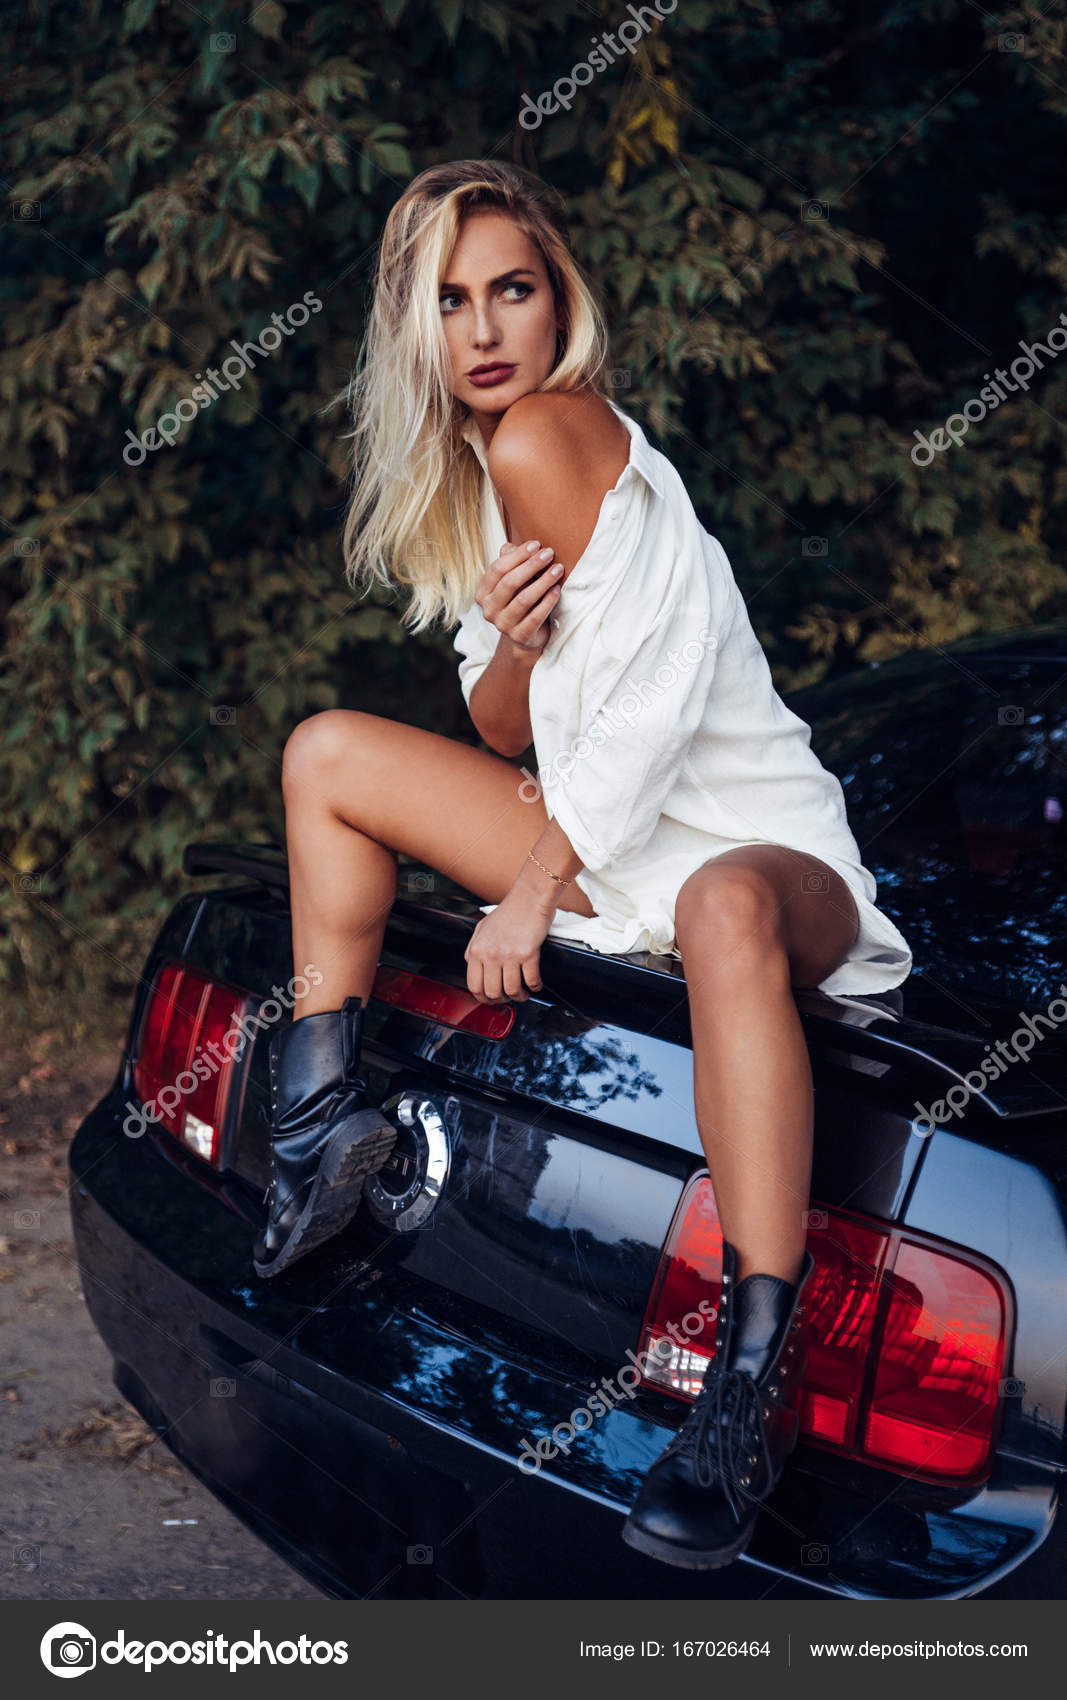 galleries hottest car selfies babes free hd photo